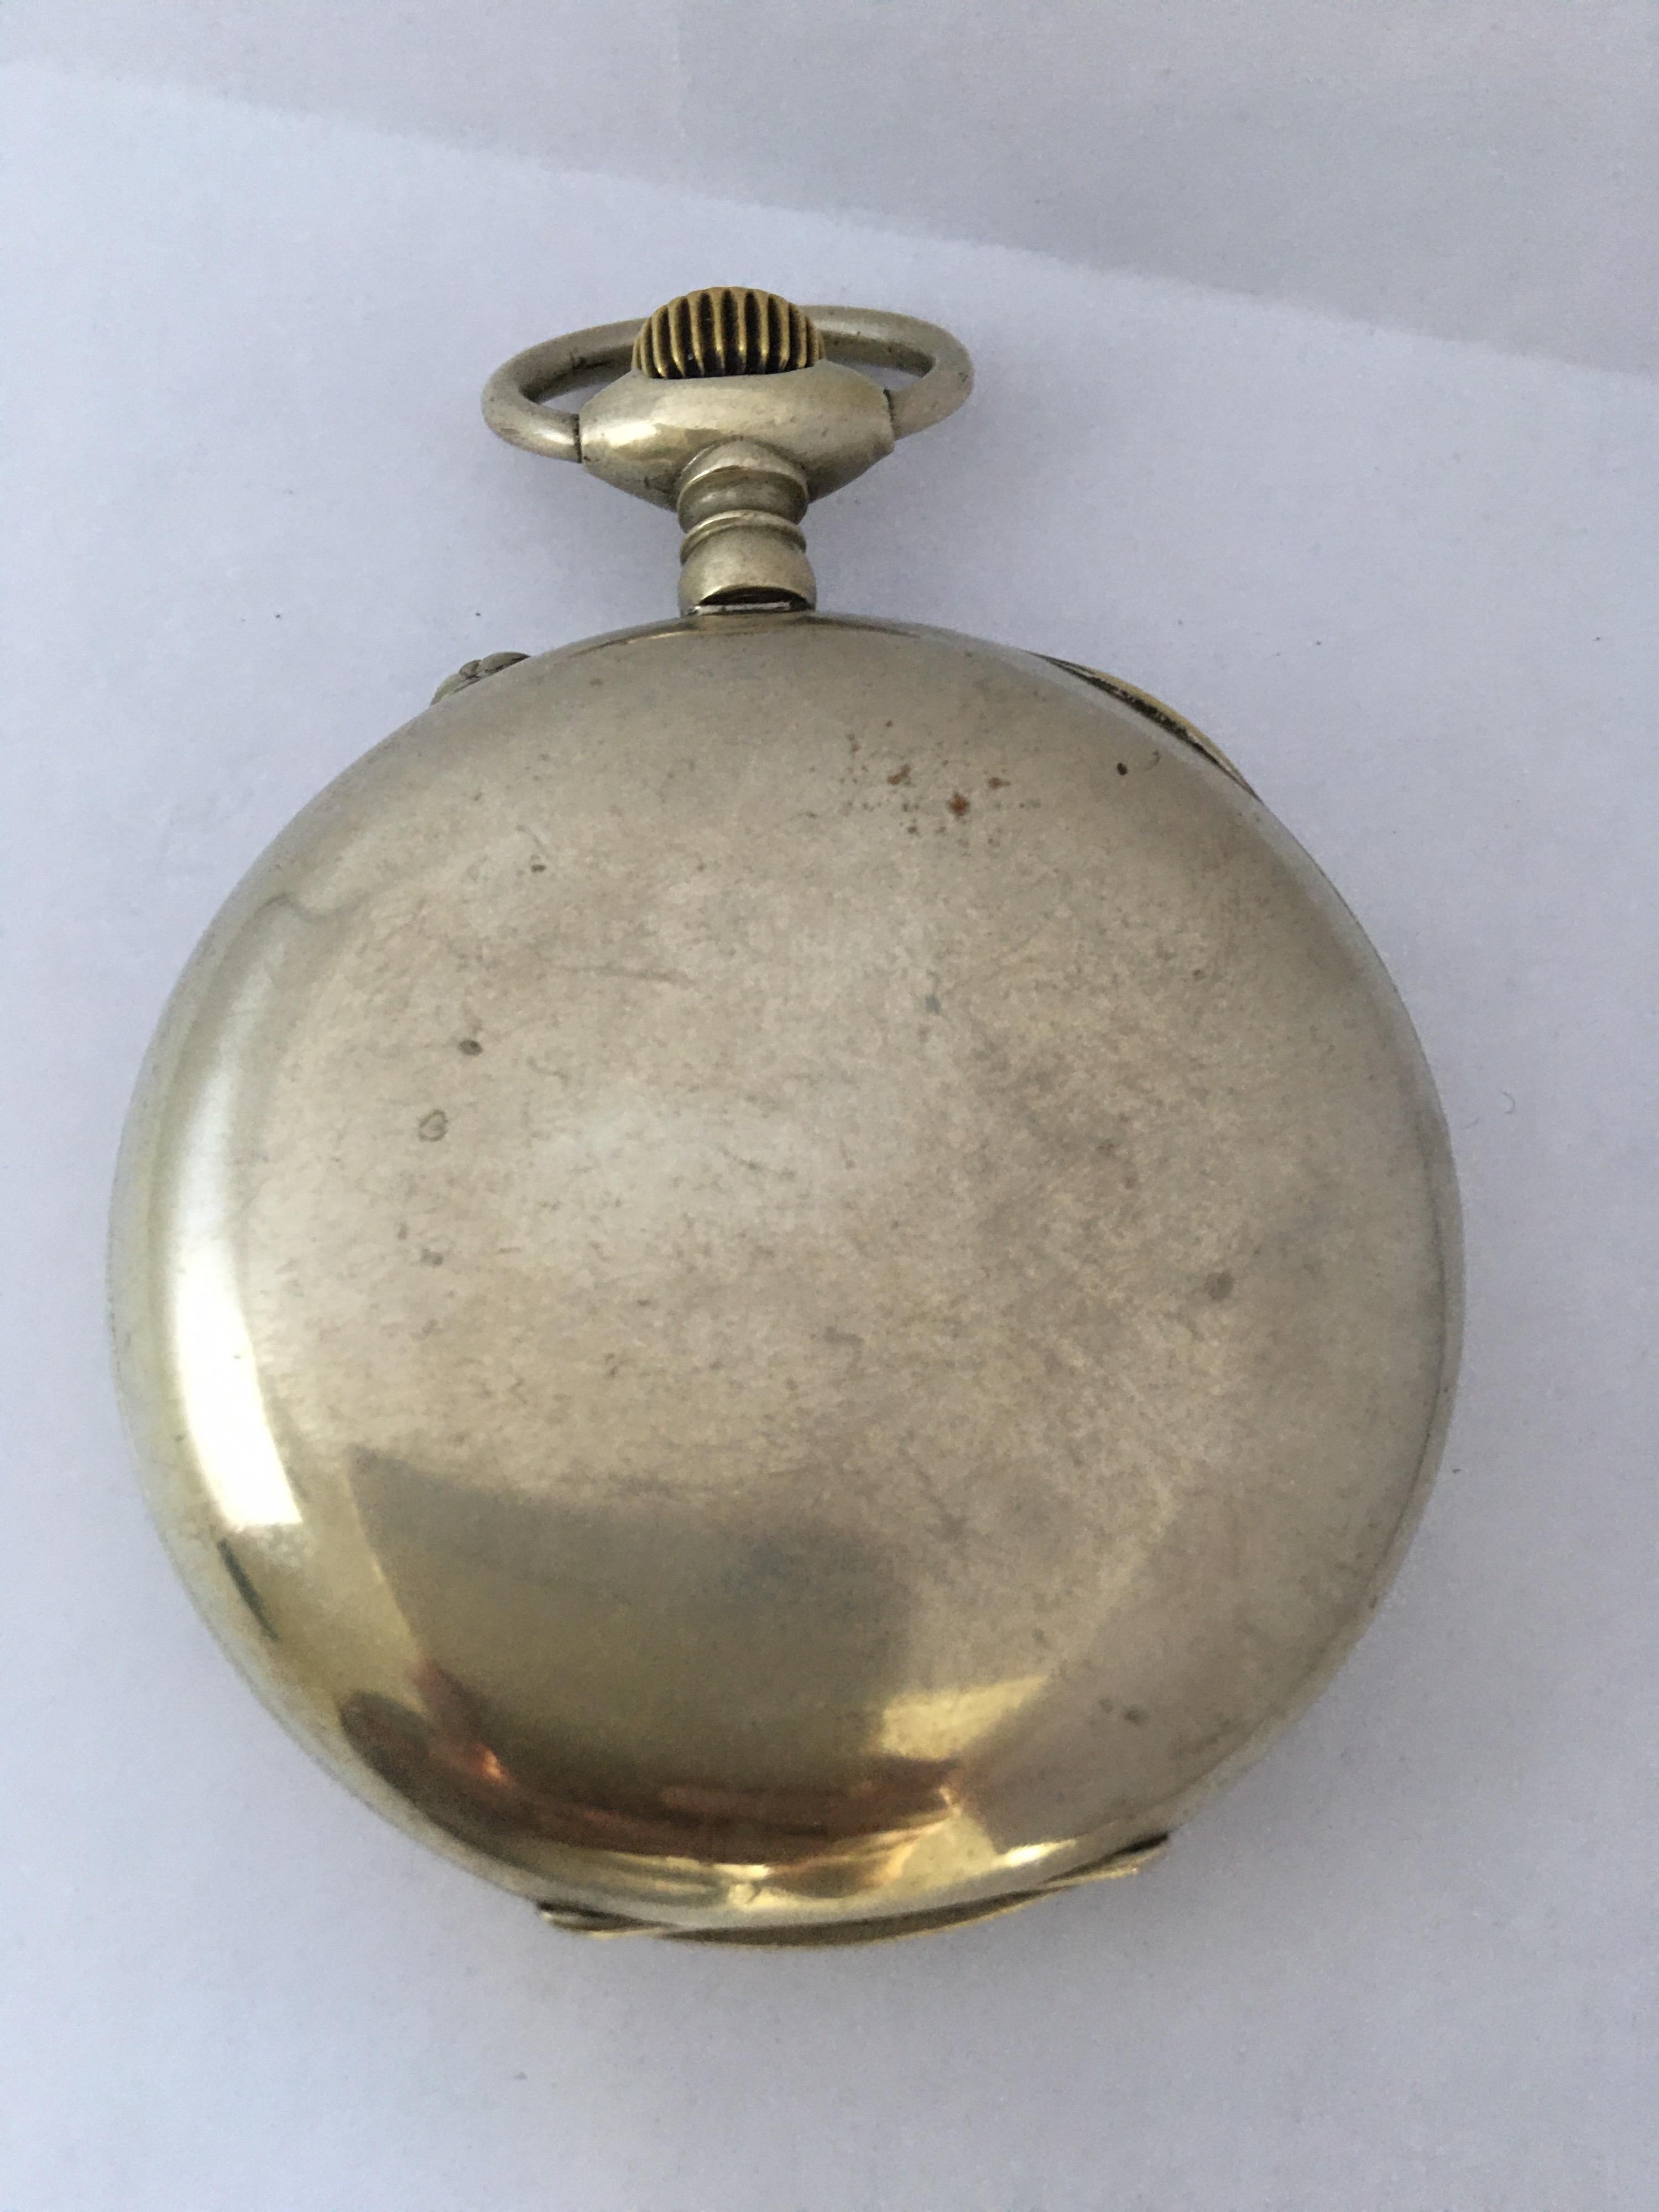 This 61mm diameter hand-winding Antique Pocket
Watch is in good working condition and it is ticking
Well. It is recently been serviced and run smoothly. Visible signs of ageing and wear with small and light scratches on the glass and on the watch